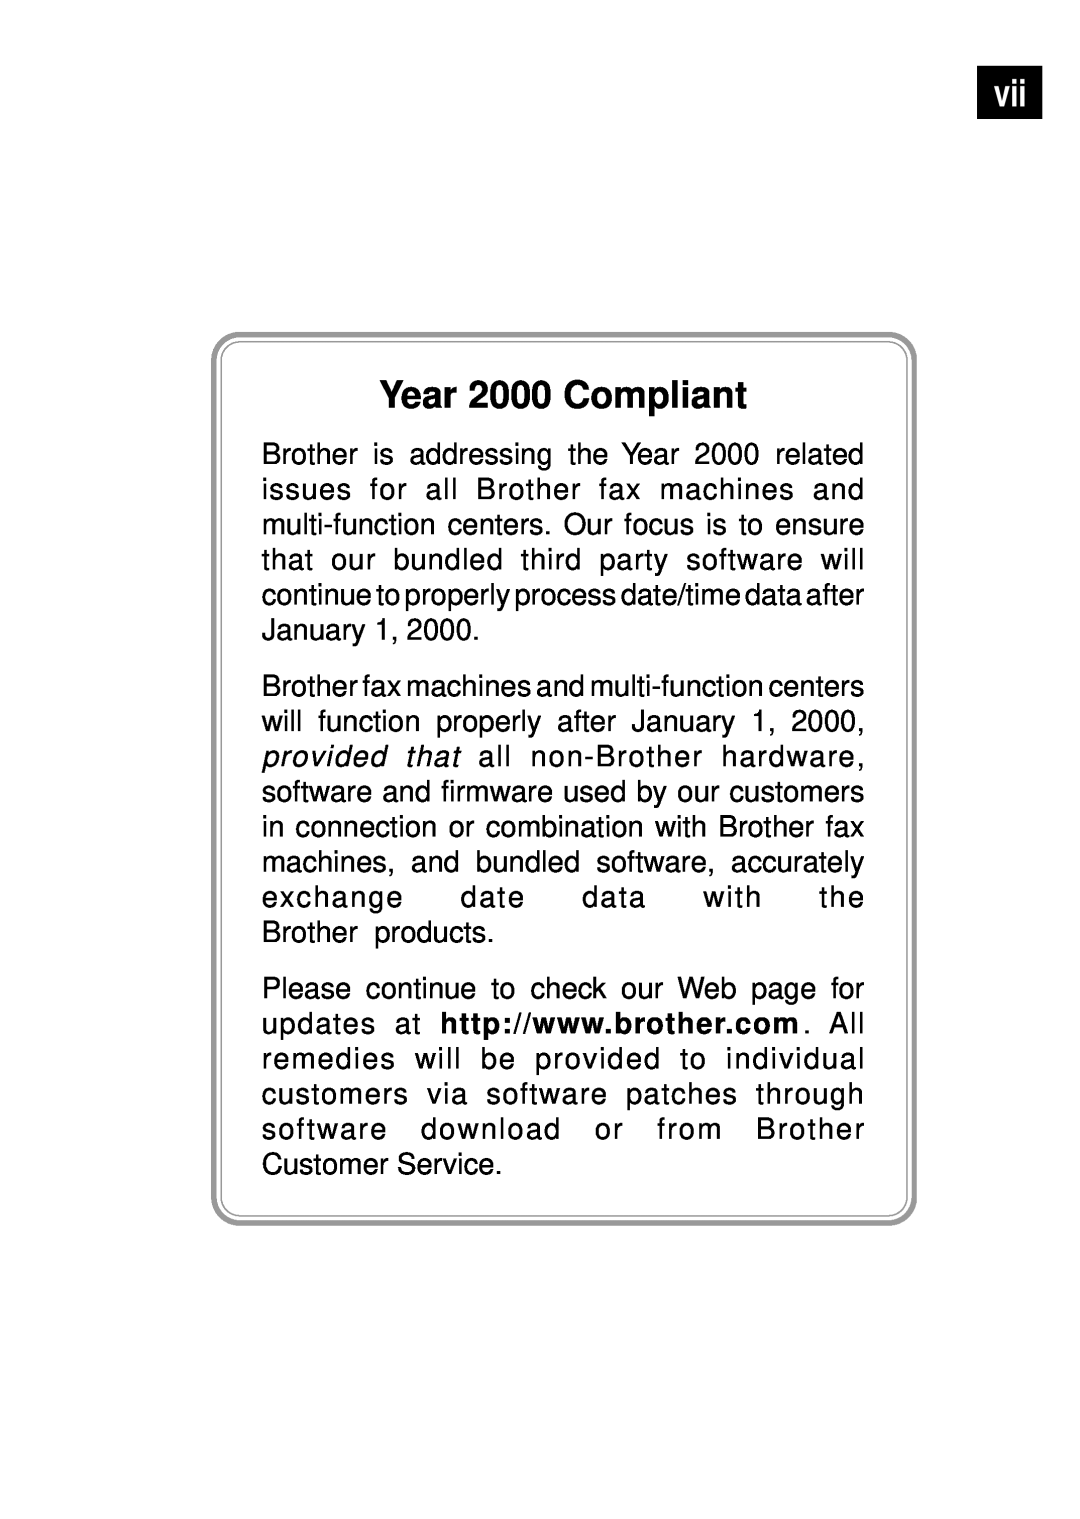 Brother FAX 255 owner manual Year 2000 Compliant 